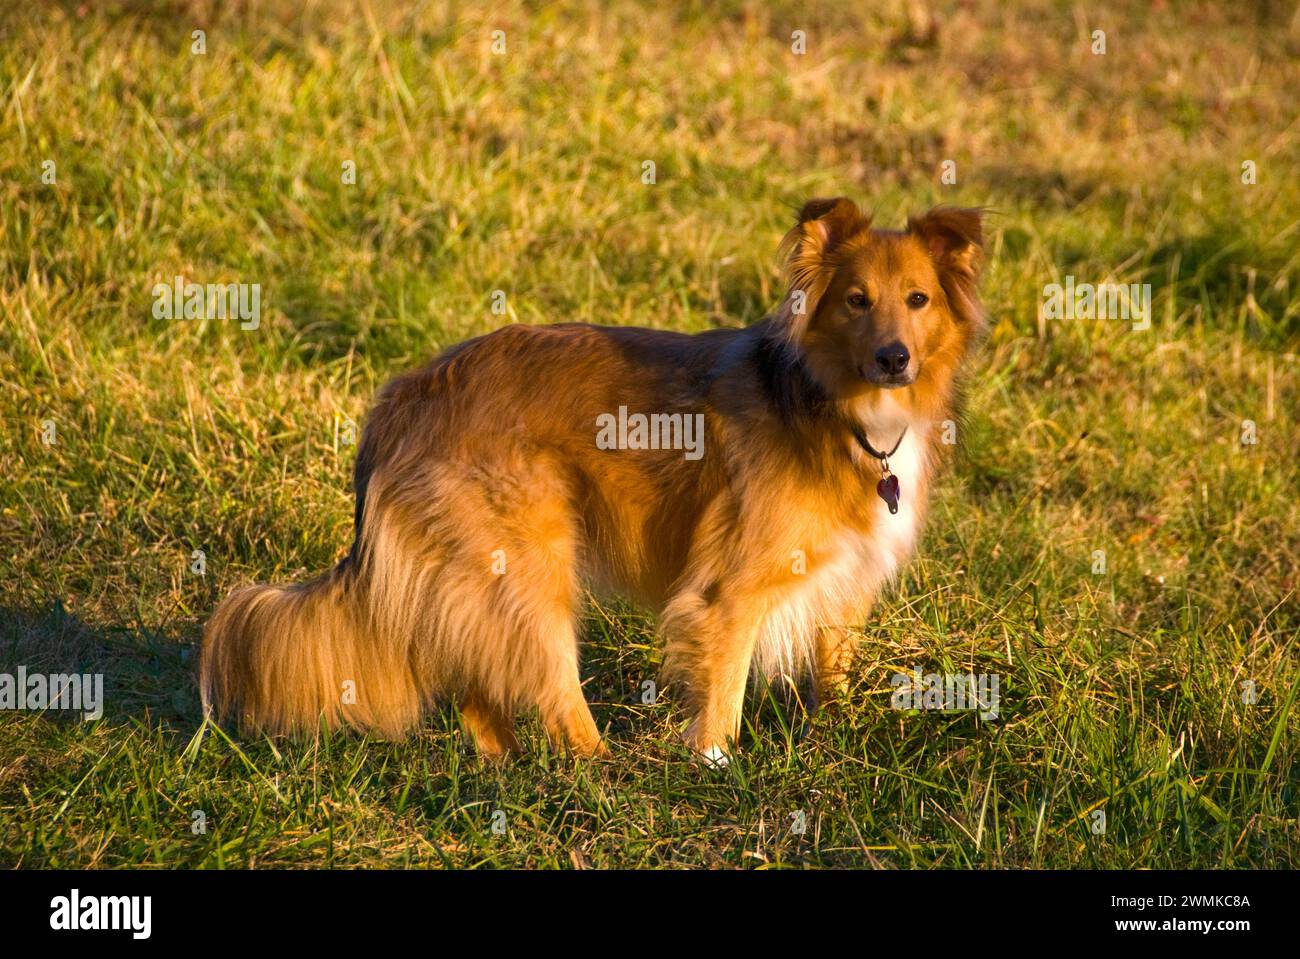 Portrait of a long-haired dog on grass Stock Photo